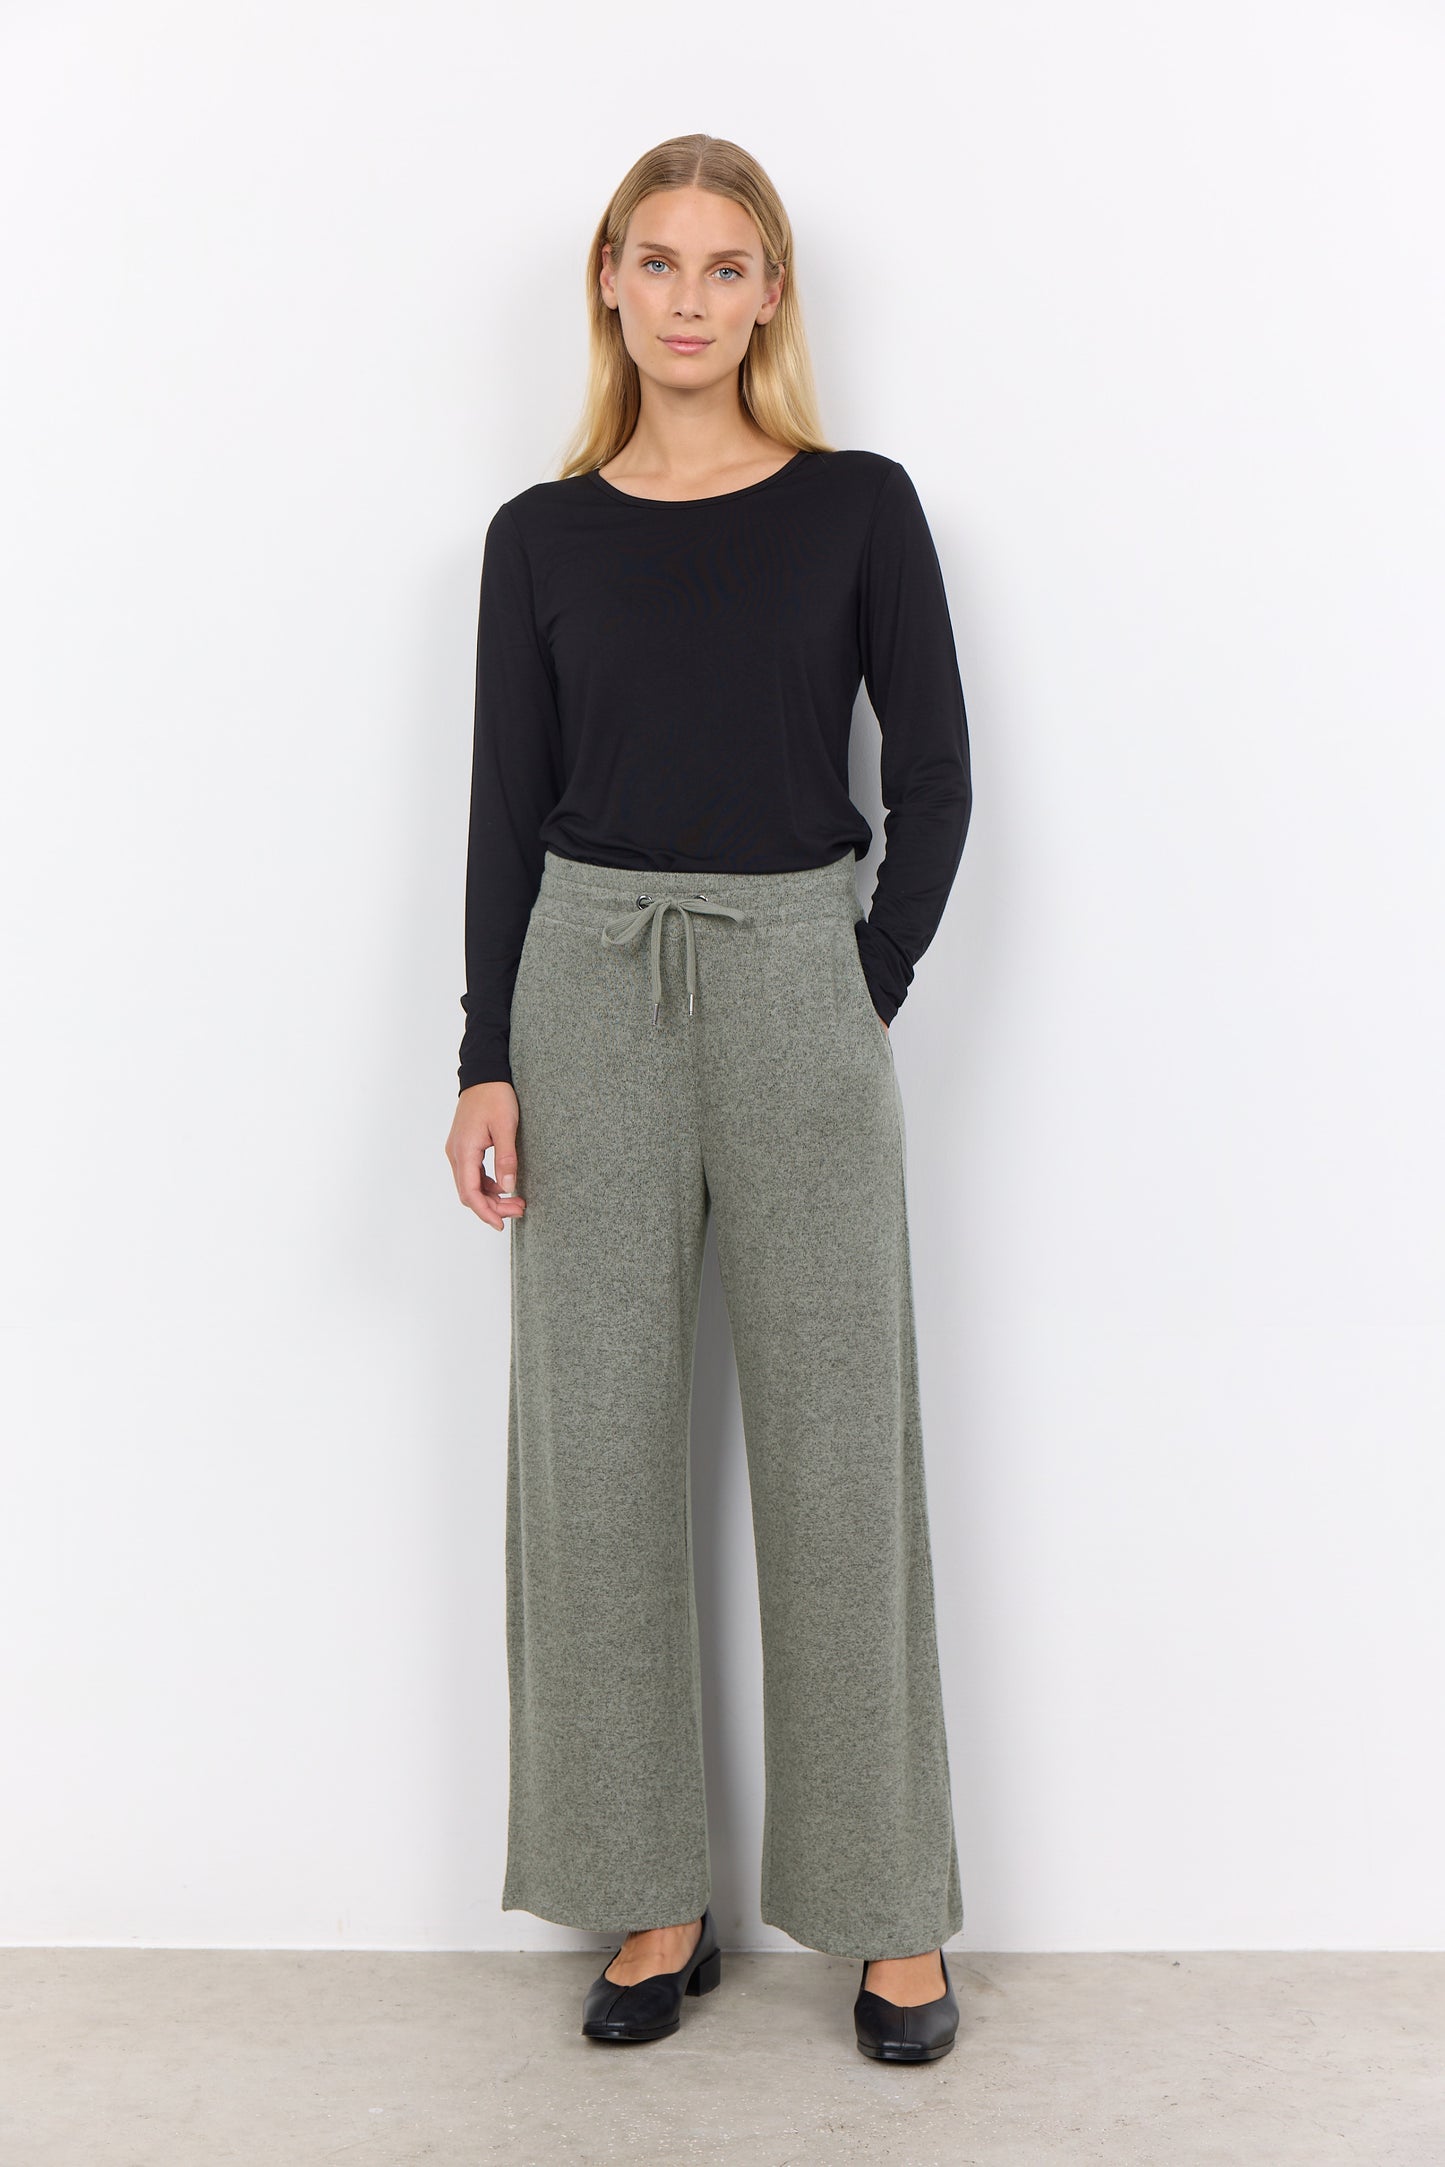 Biara 74 Knitted Pants by Soya Concept